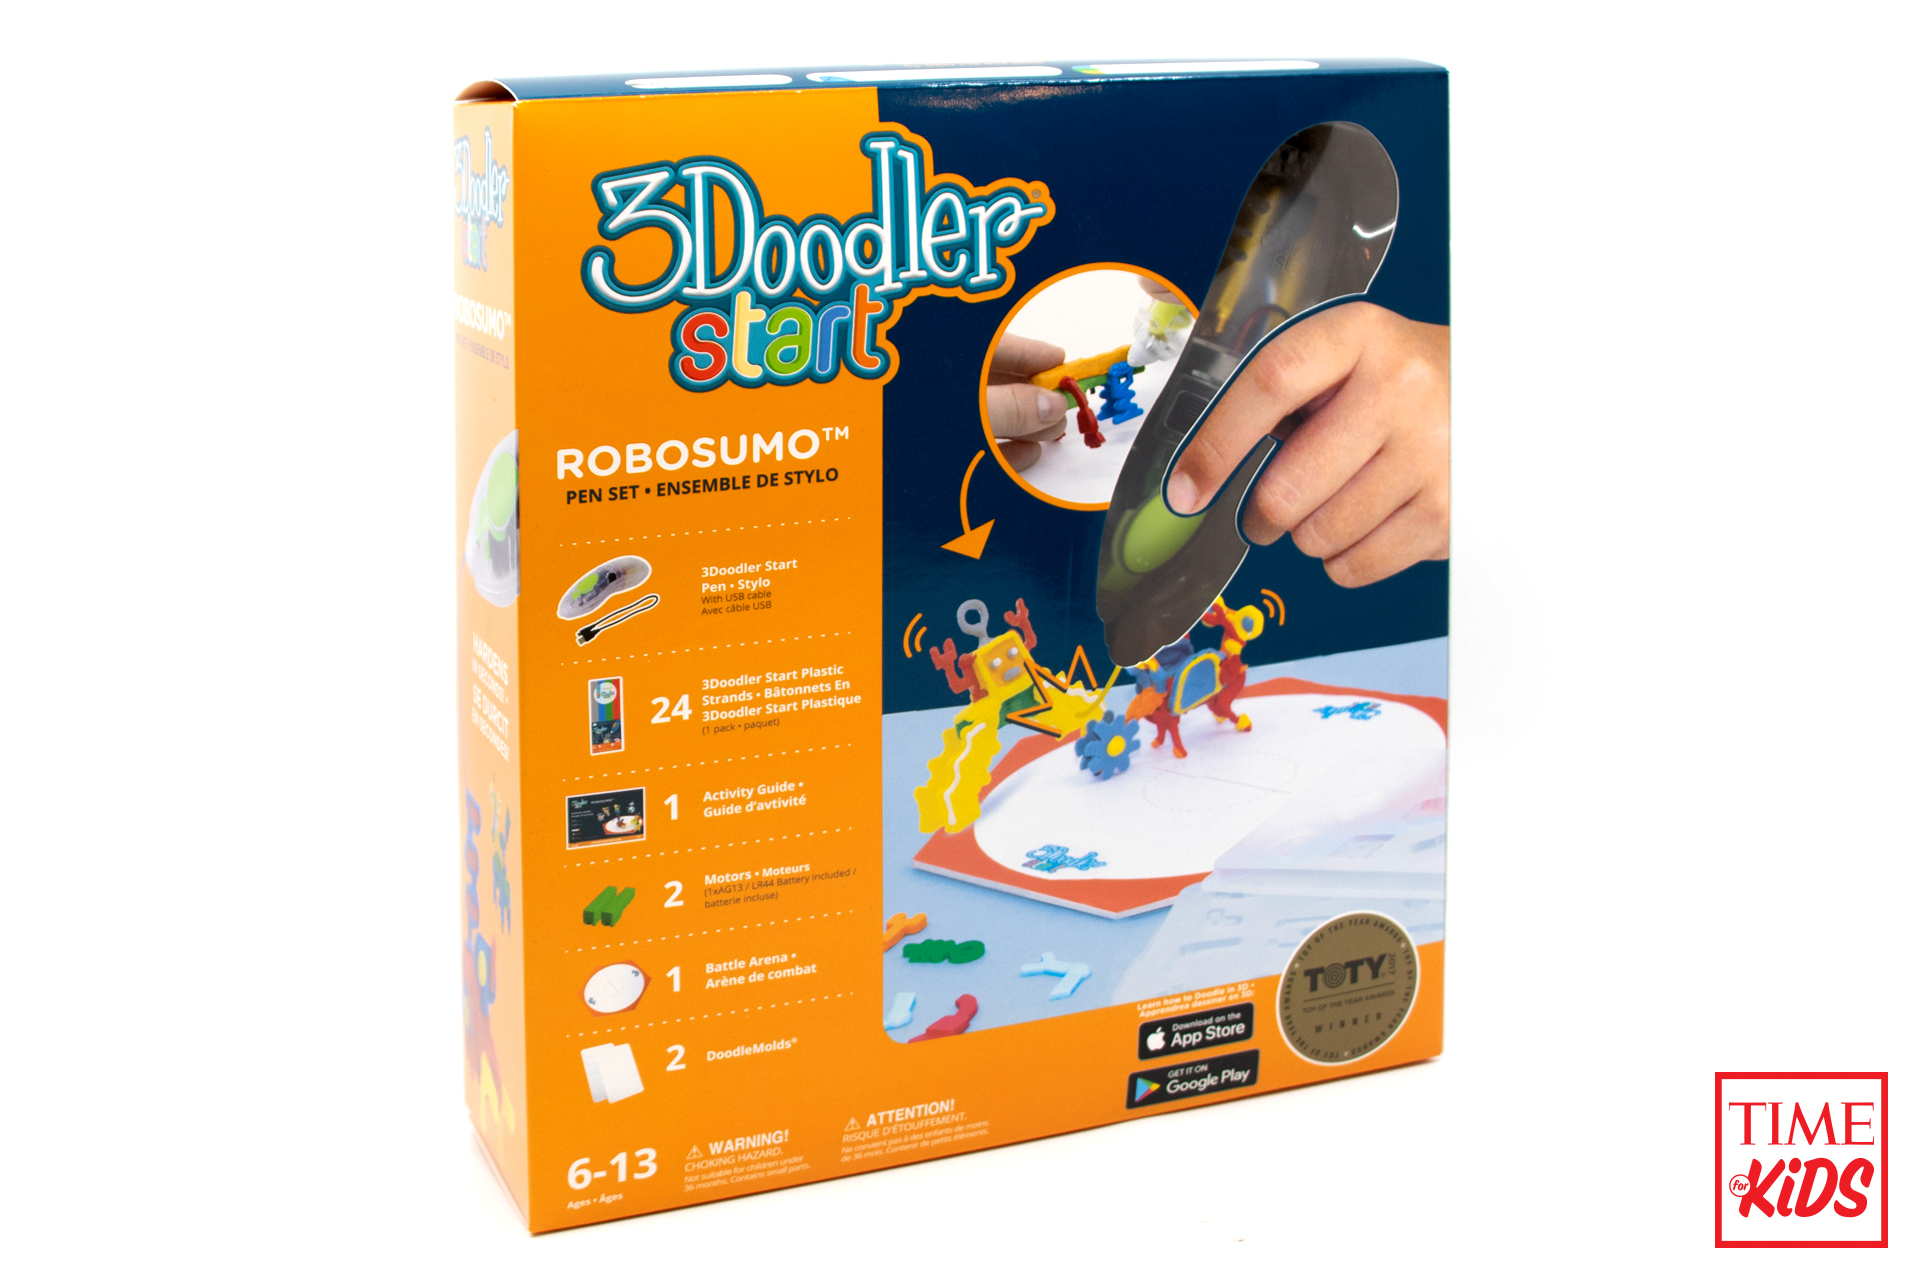 Picture of 3-D Doodler for toy guide.